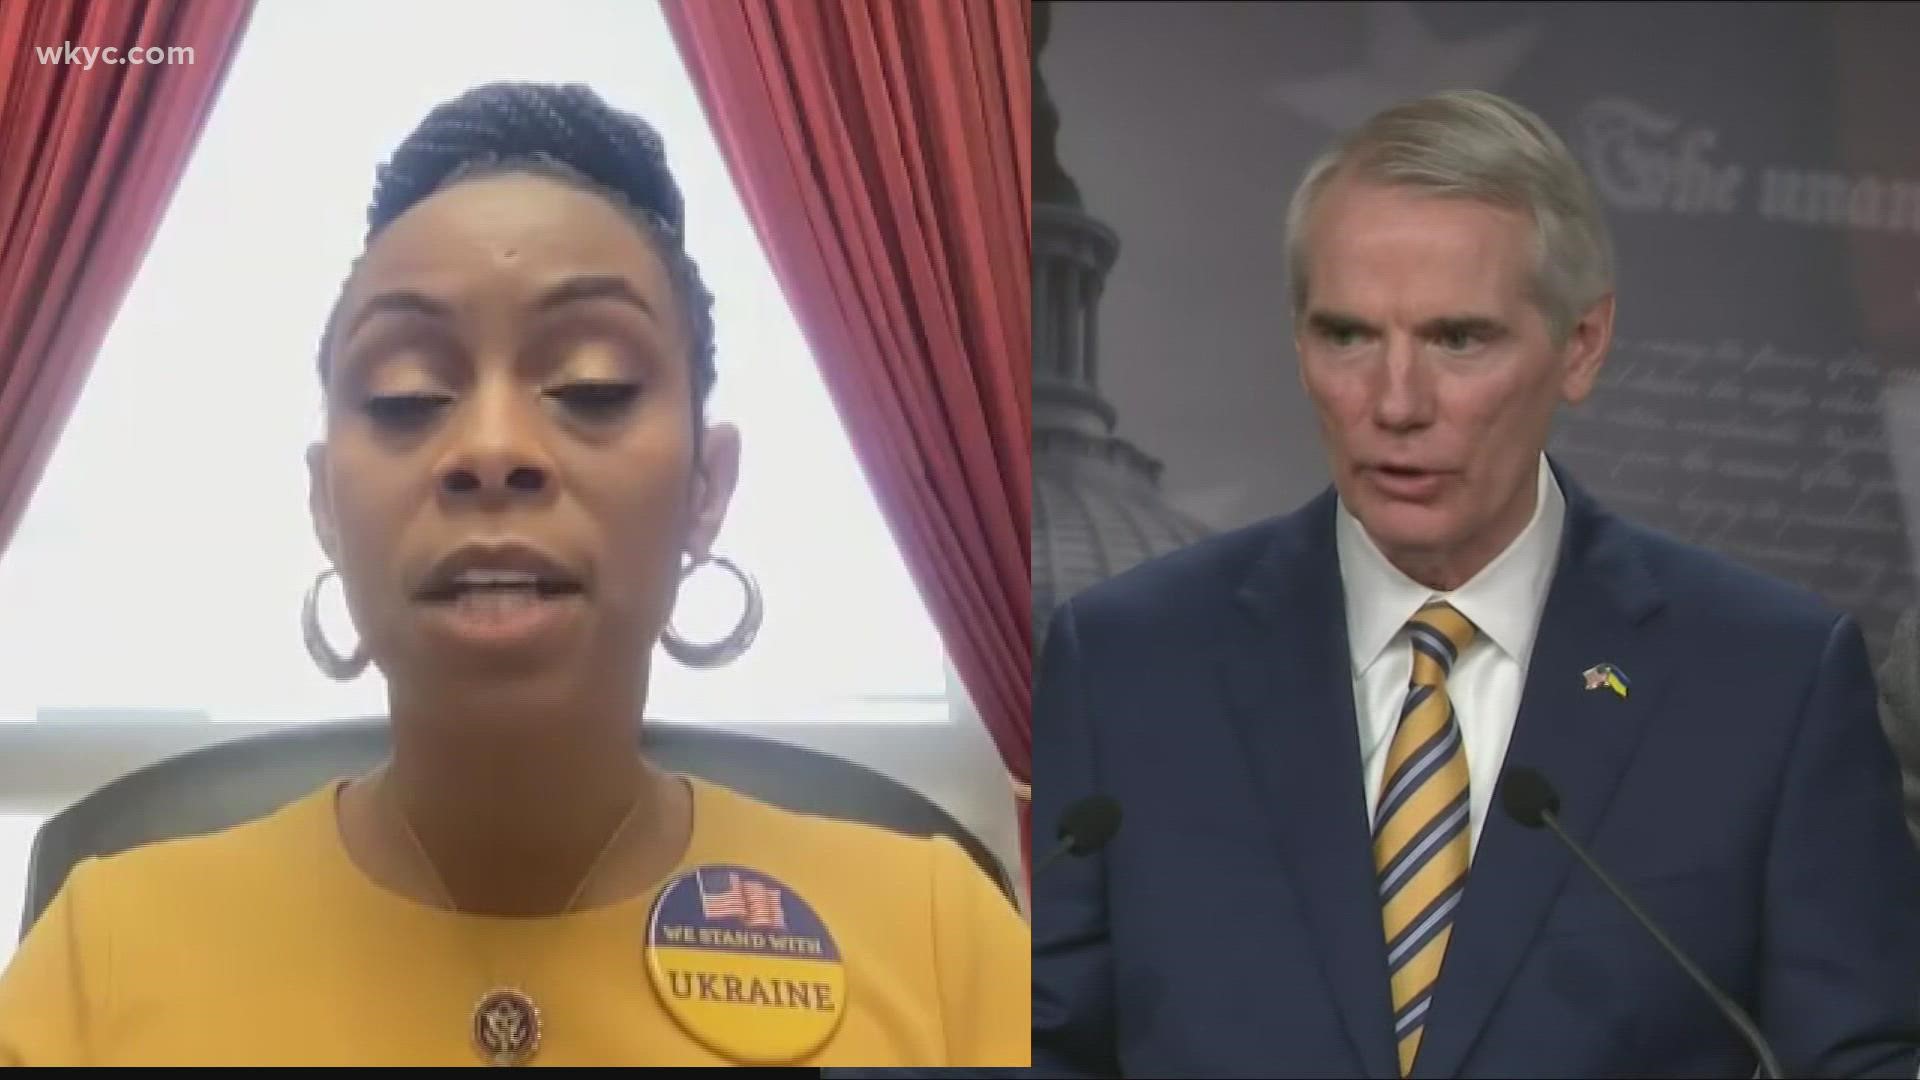 Zelenskyy spoke to members of Congress in a livestreamed address. Sen. Rob Portman and Rep. Shontel Brown gave reaction to the speech.